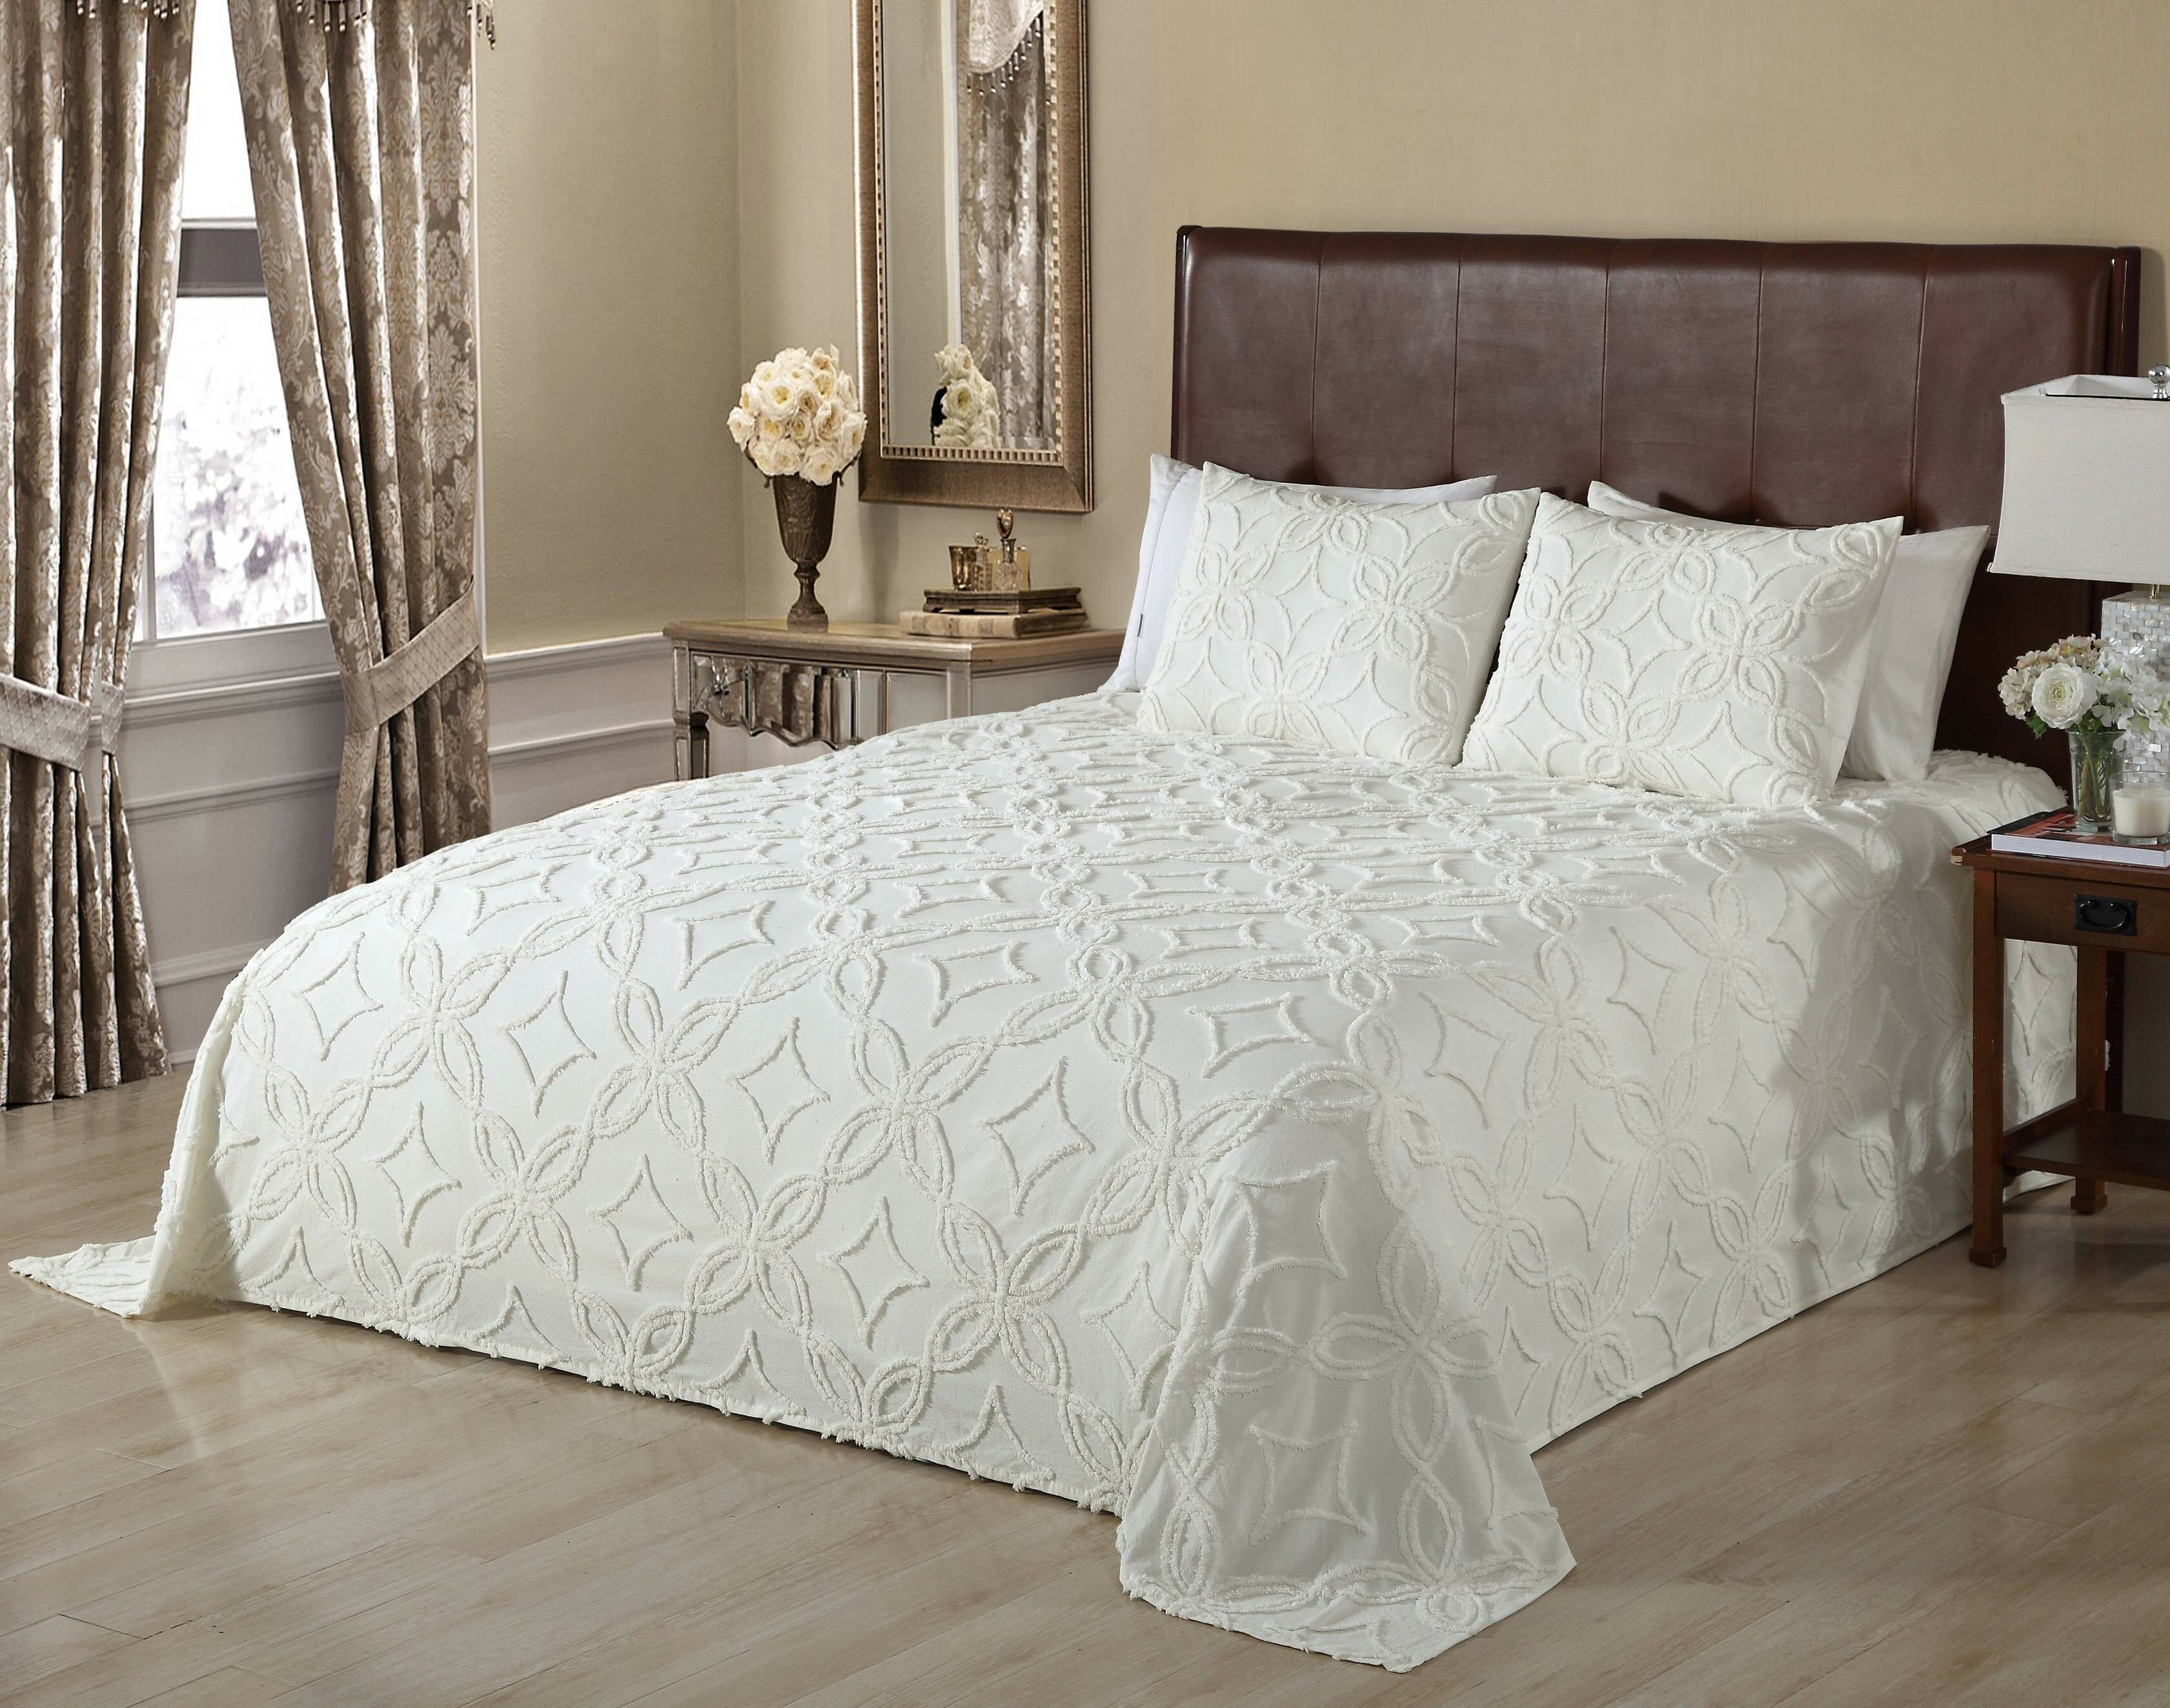 Ophelia Co Gode Chenille Coverlet Collection Reviews Wayfair